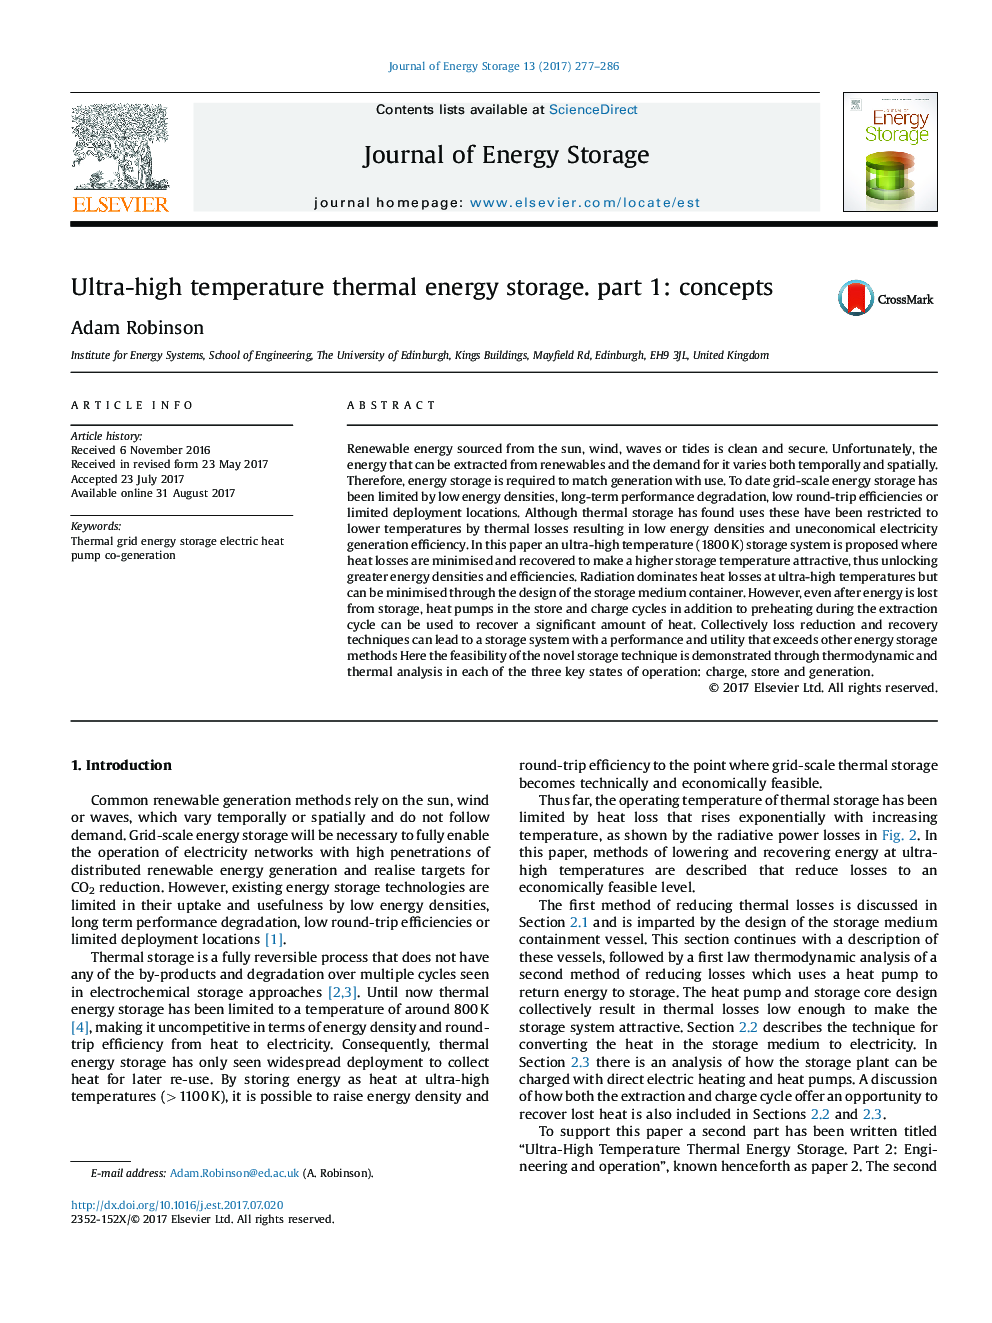 Ultra-high temperature thermal energy storage. part 1: concepts